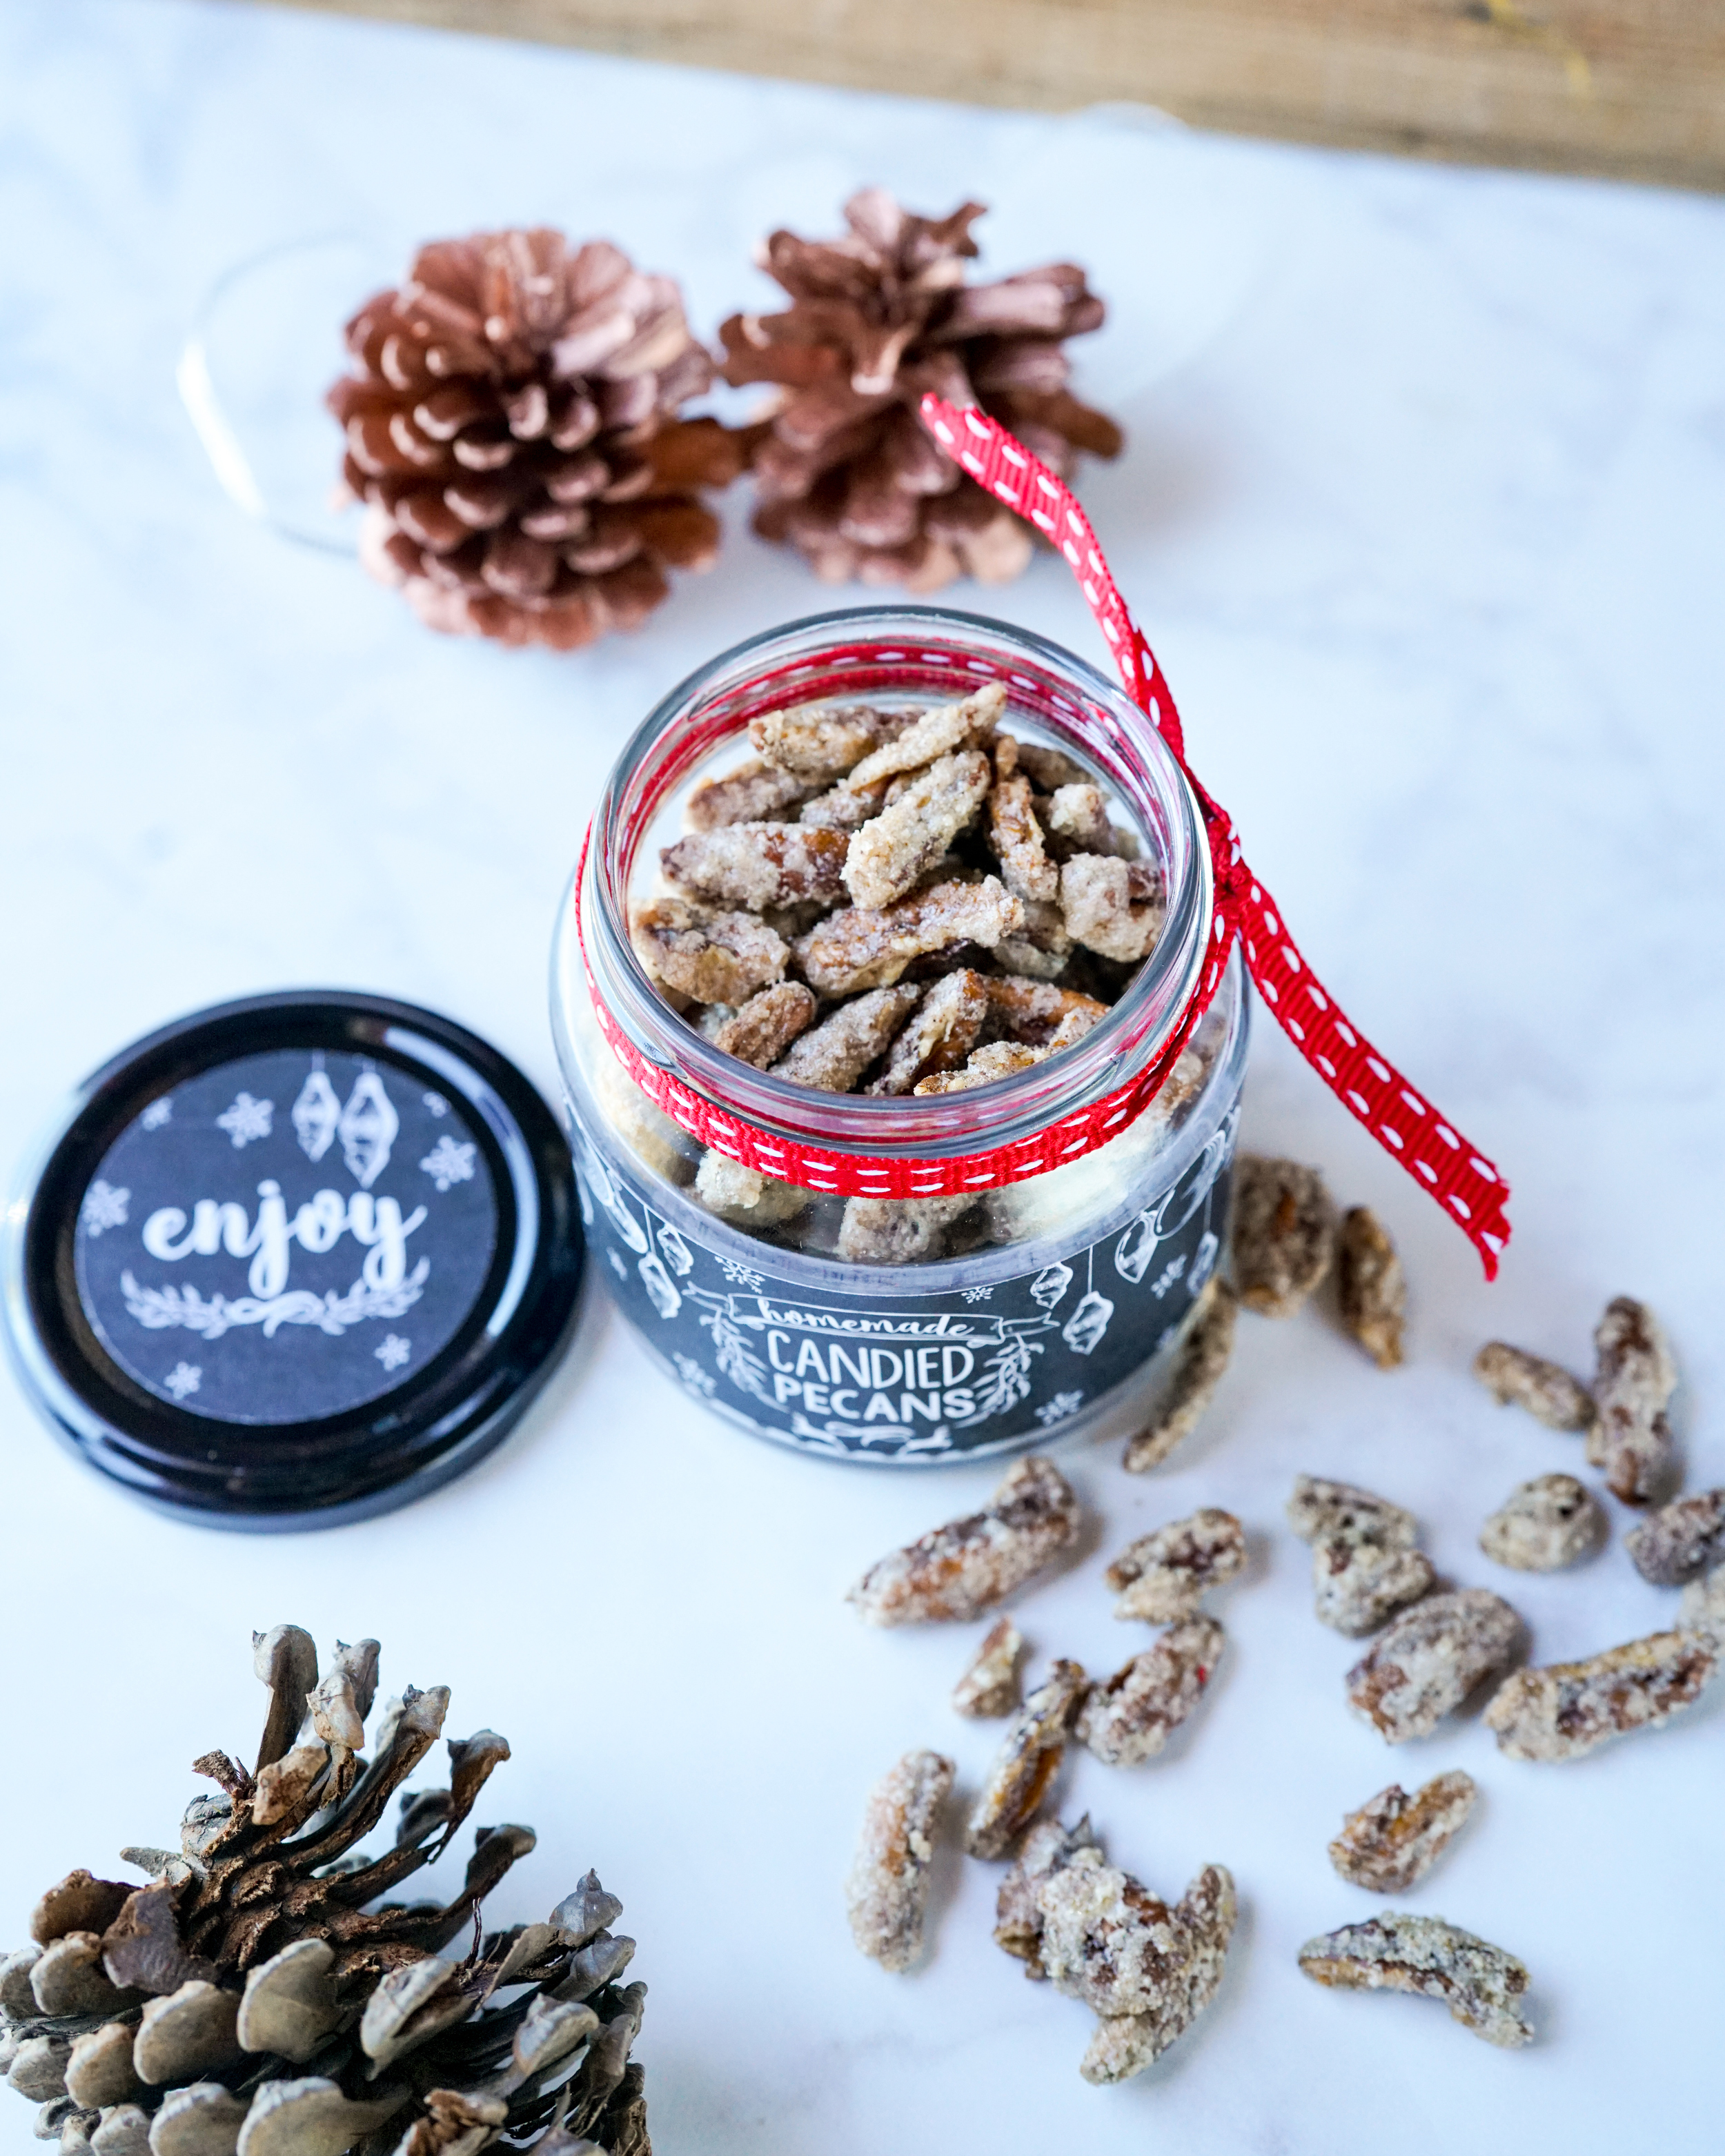 Homemade Candied Pecans Gift